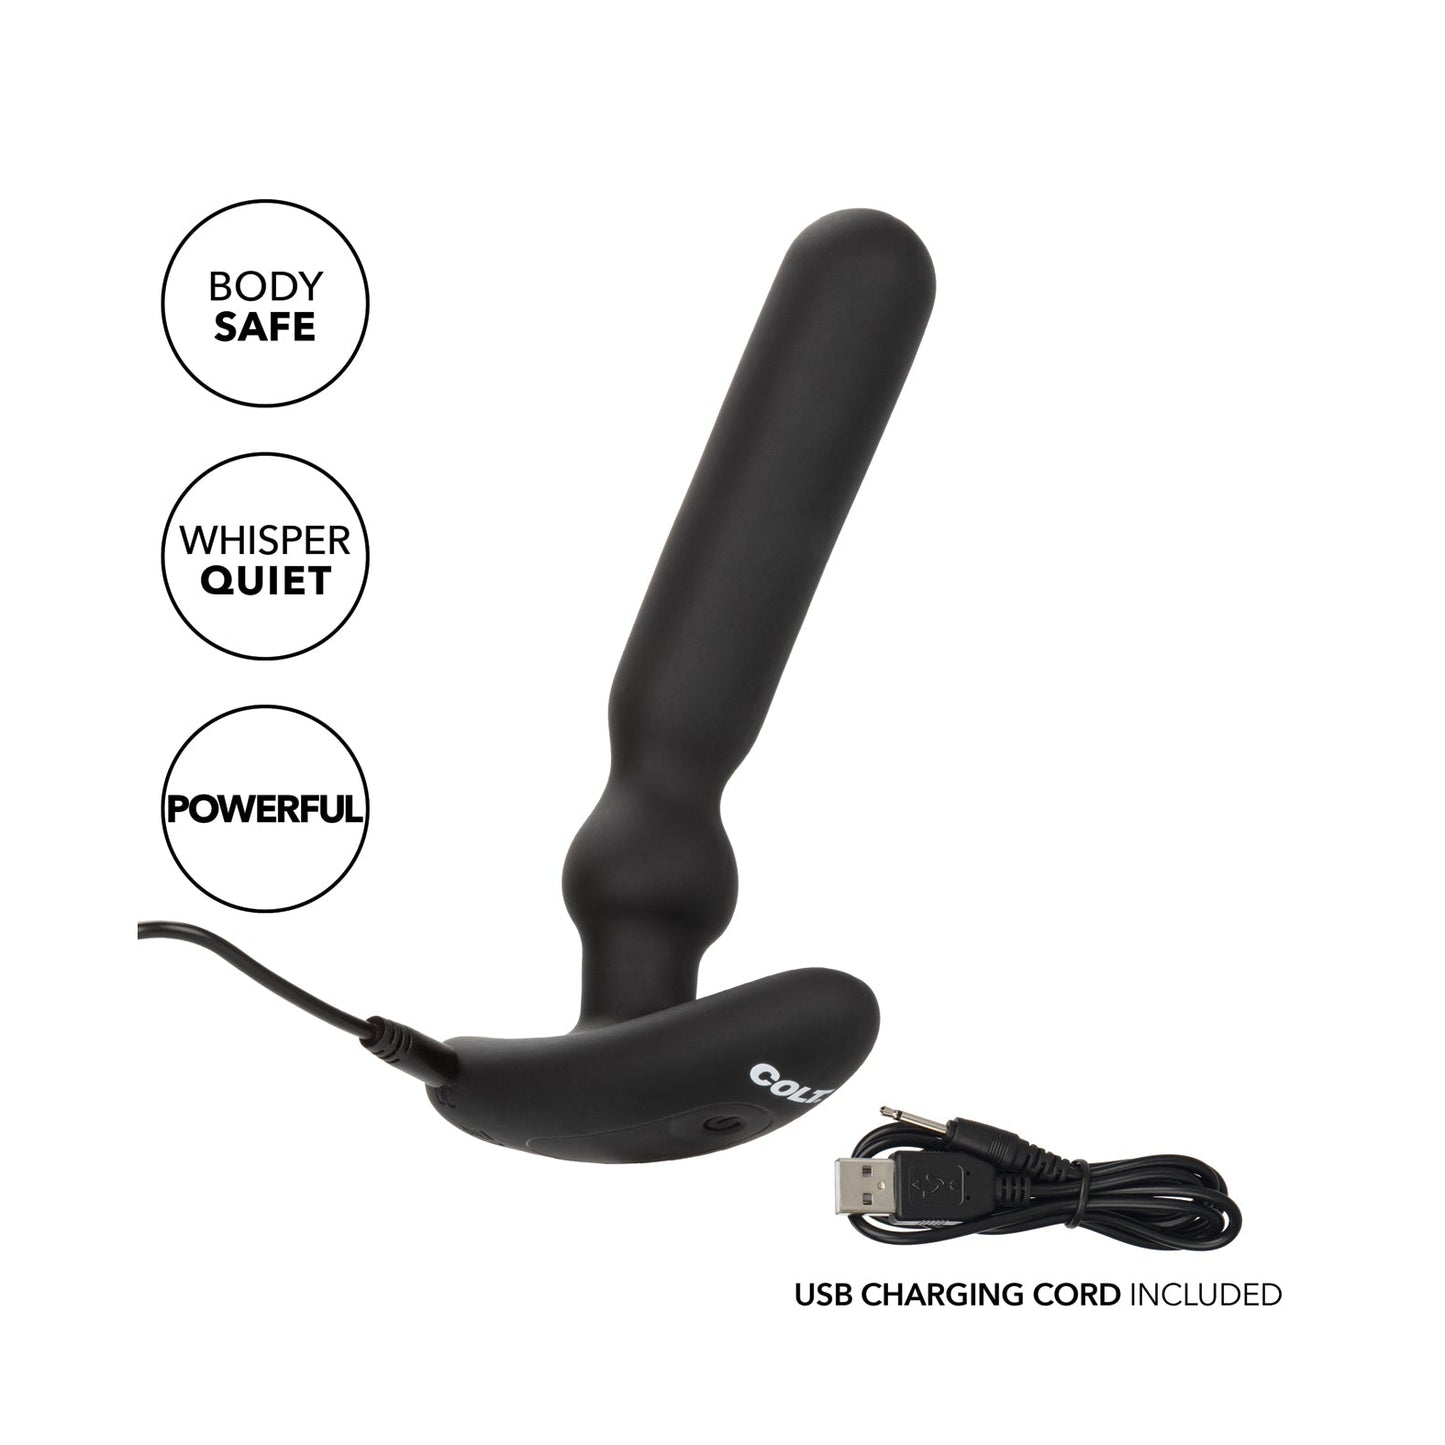 Colt Rechargeable Anal-T - Large